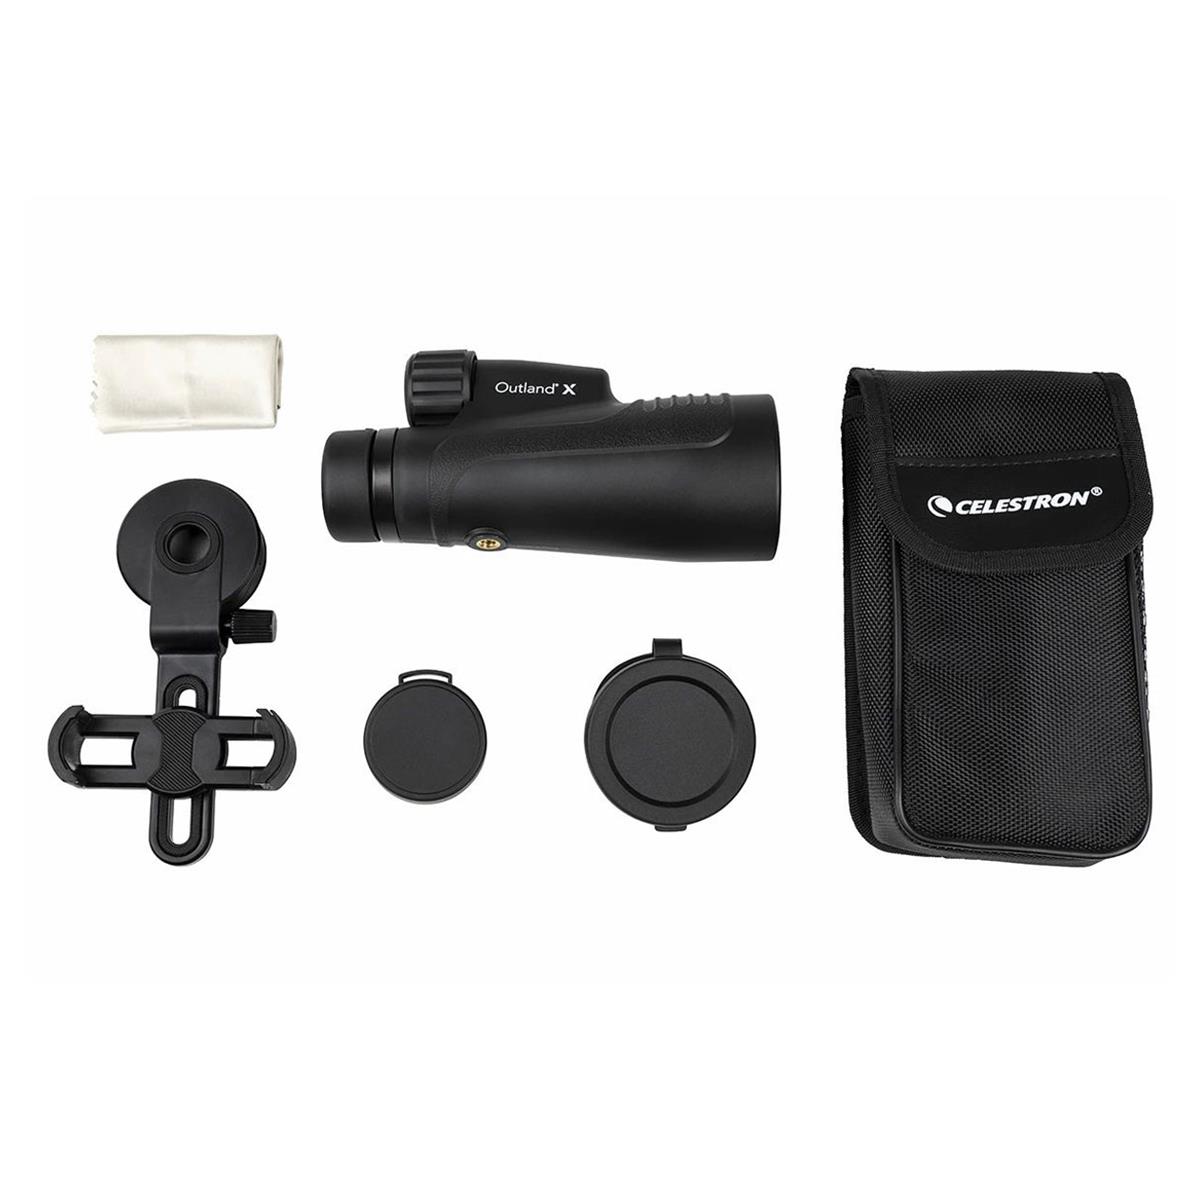 Celestron 10x50mm Outland X Monocular with Smartphone Adapter #72370